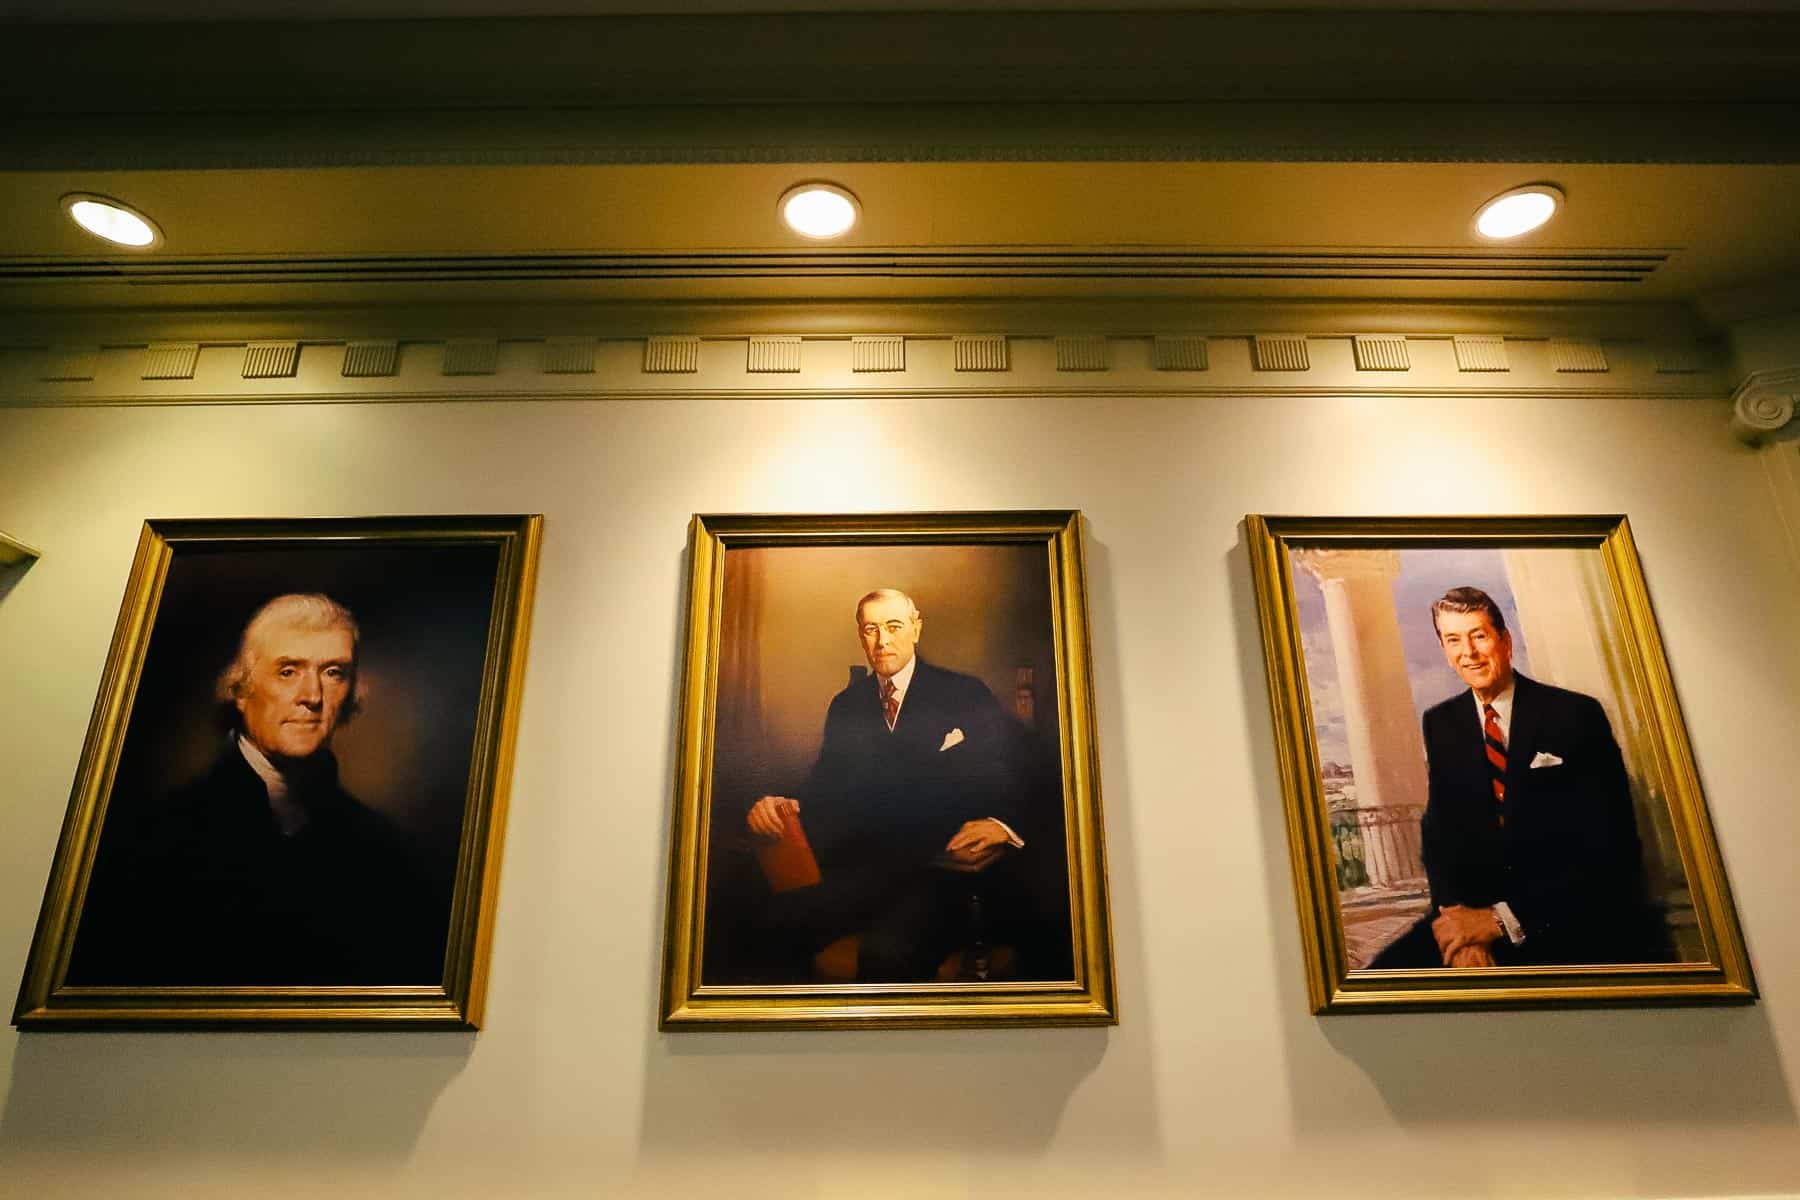 Portraits of former presidents